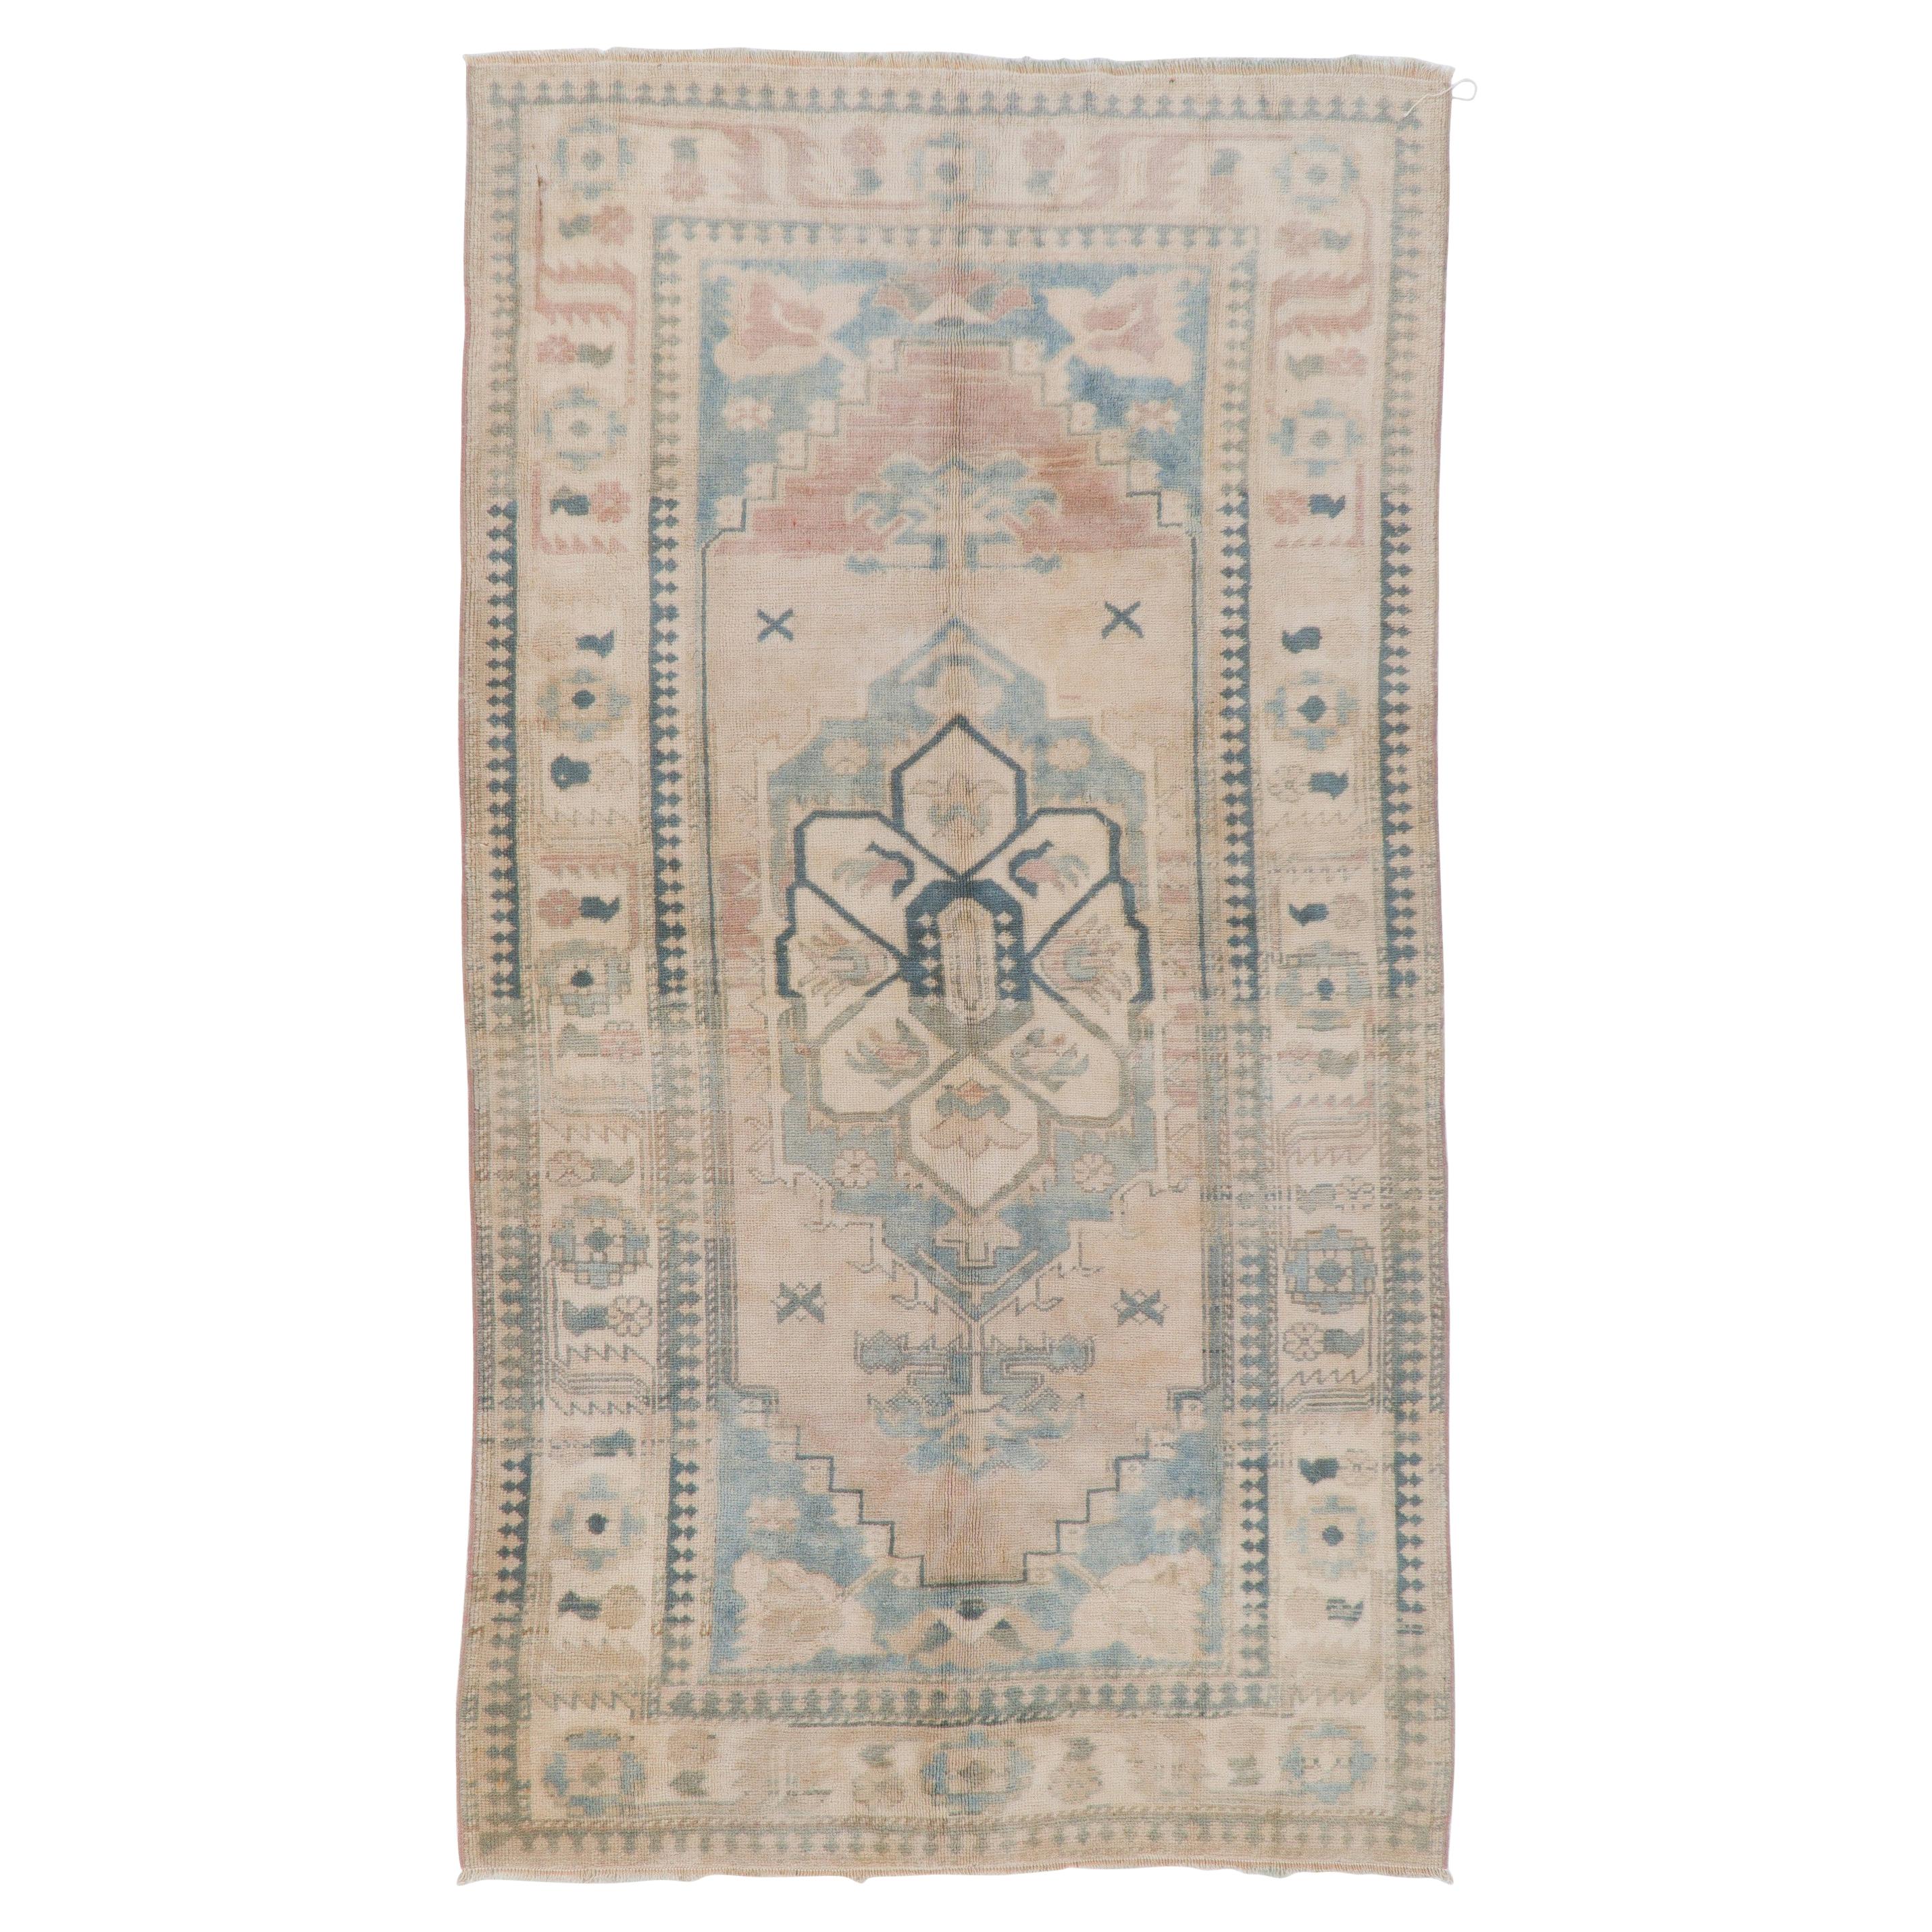 4.4x8 Ft Vintage Anatolian Oushak Rug with Wool Pile in Faded Pink and Blue For Sale